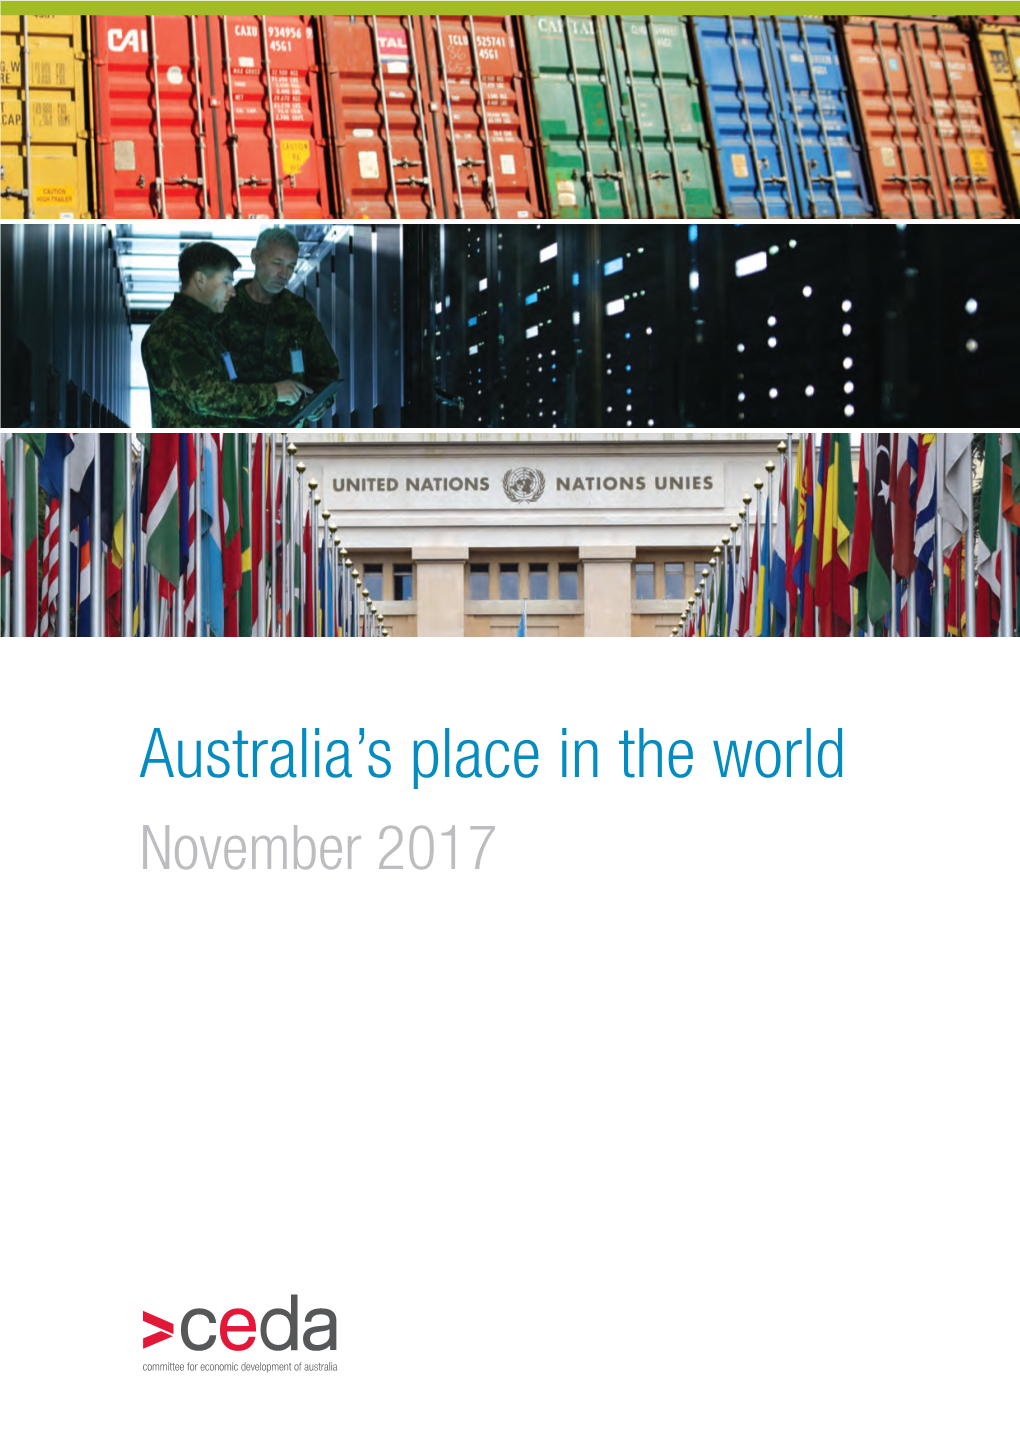 Australia's Place in the World